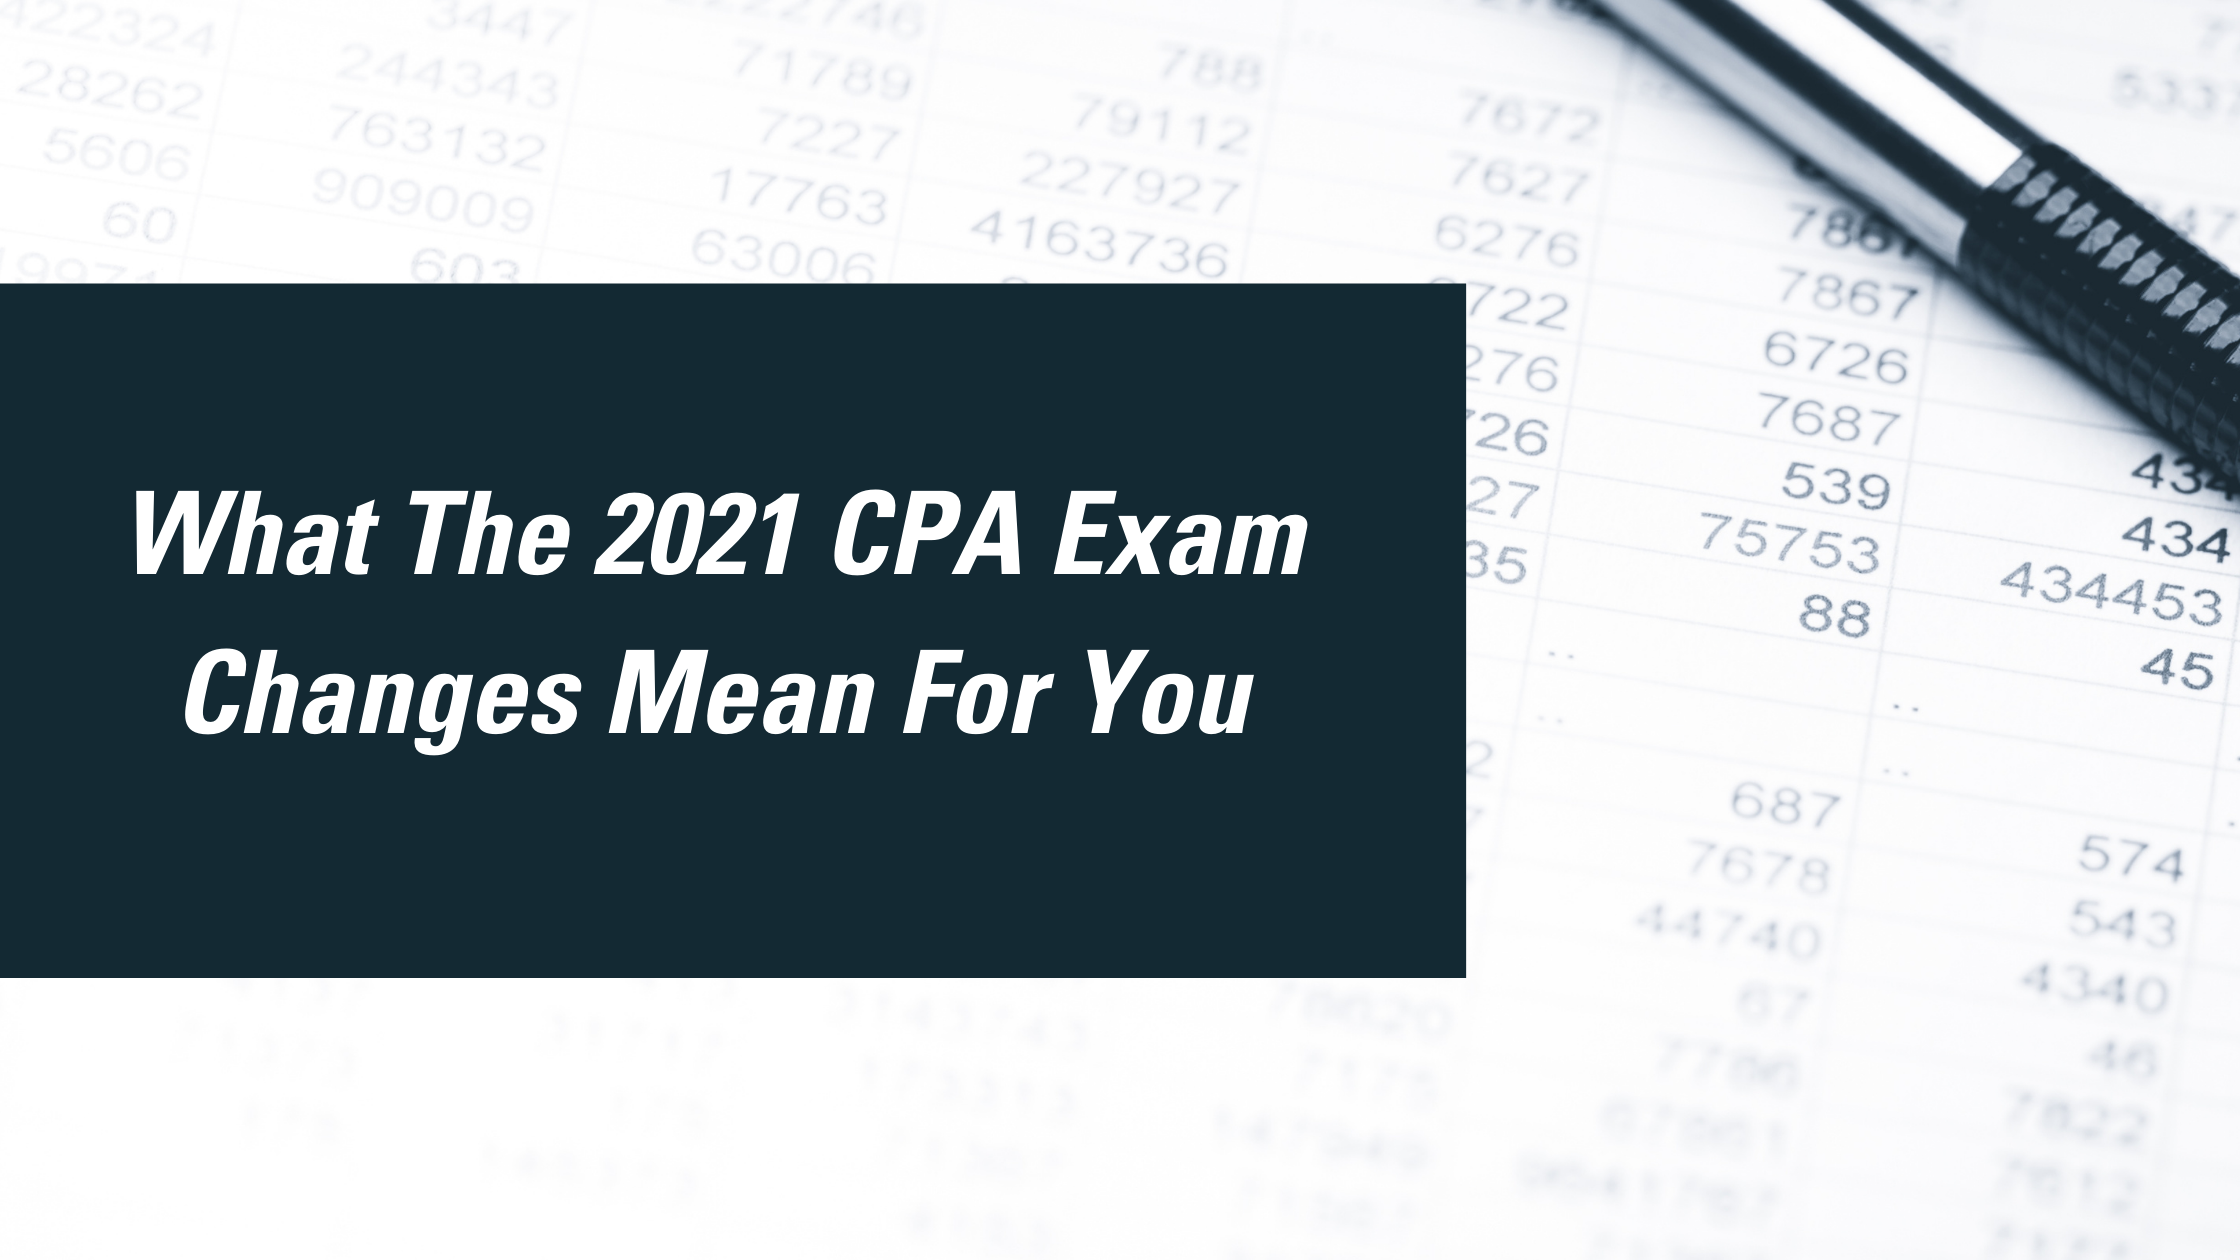 What the 2021 CPA Exam changes mean for you